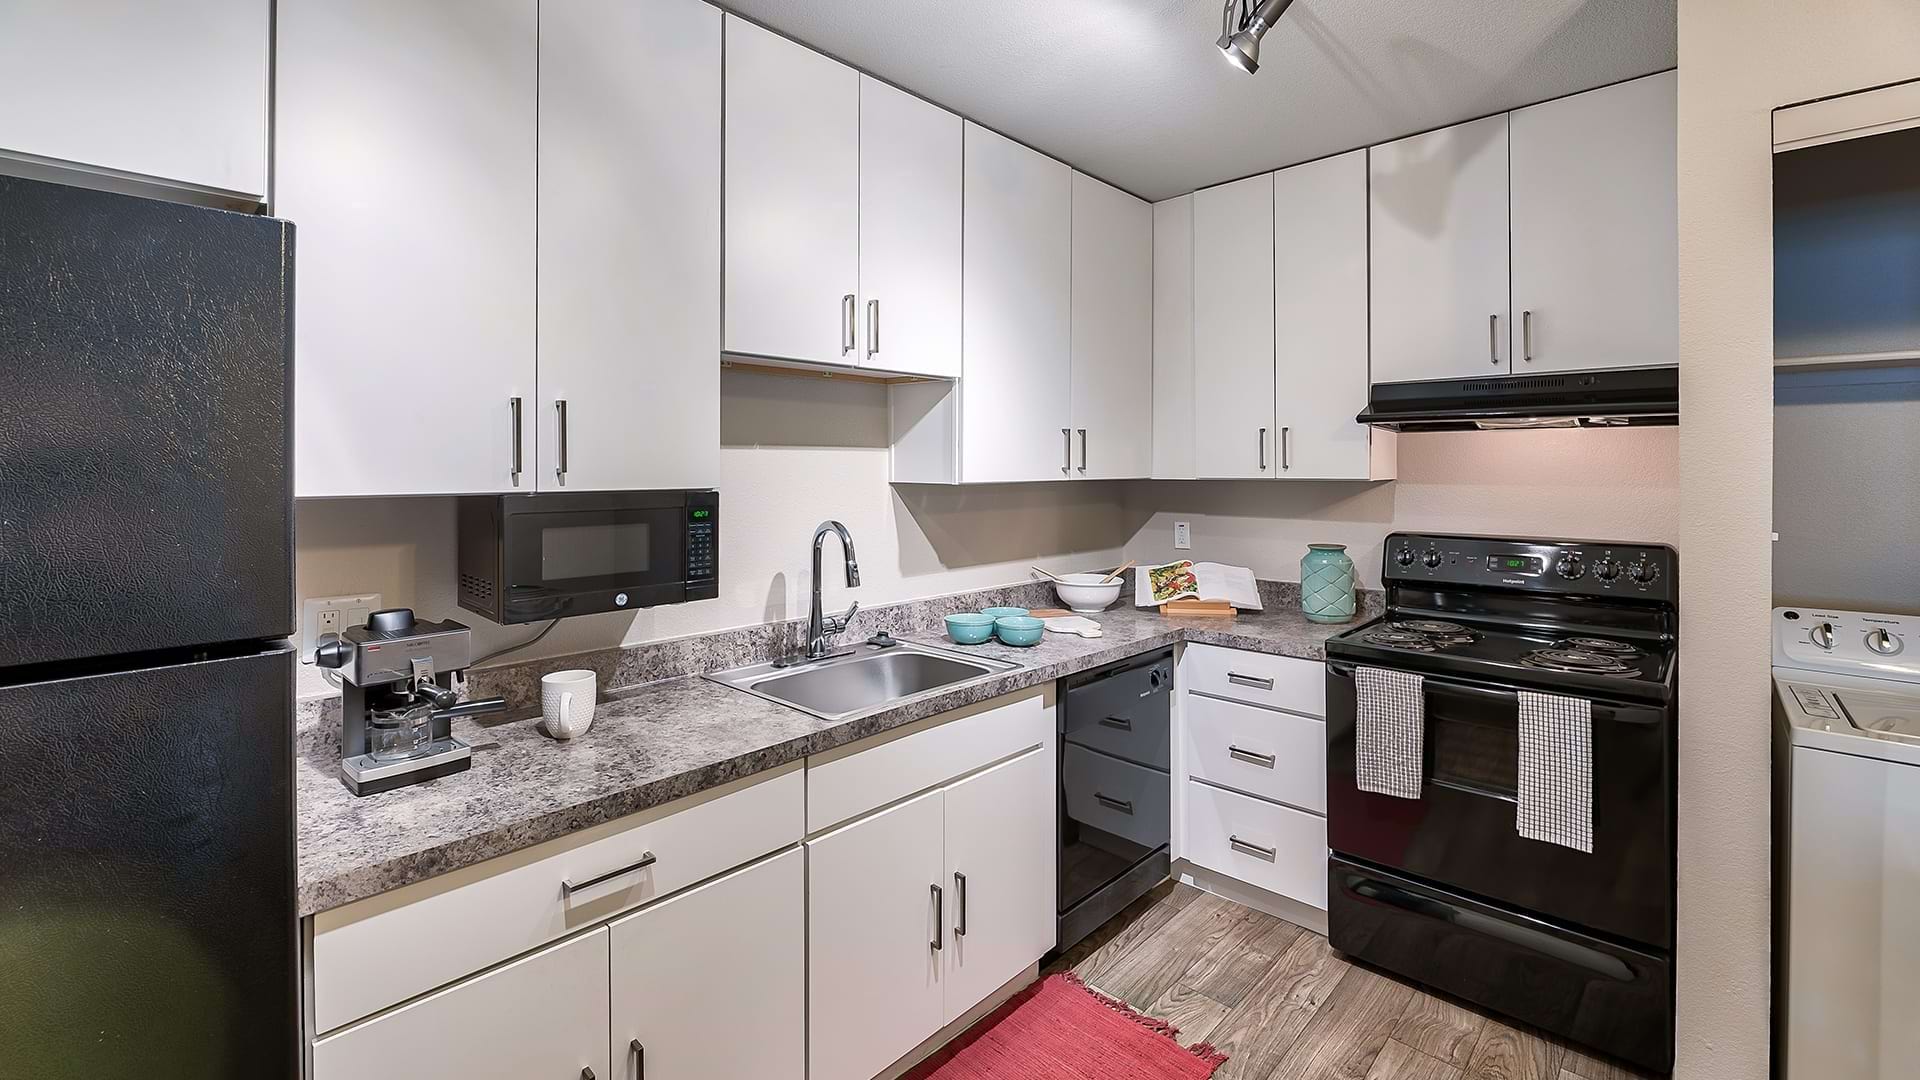 Kitchen with Granite-Style Countertops and White Cabinetry at Our Gilbert Apartments for Rent